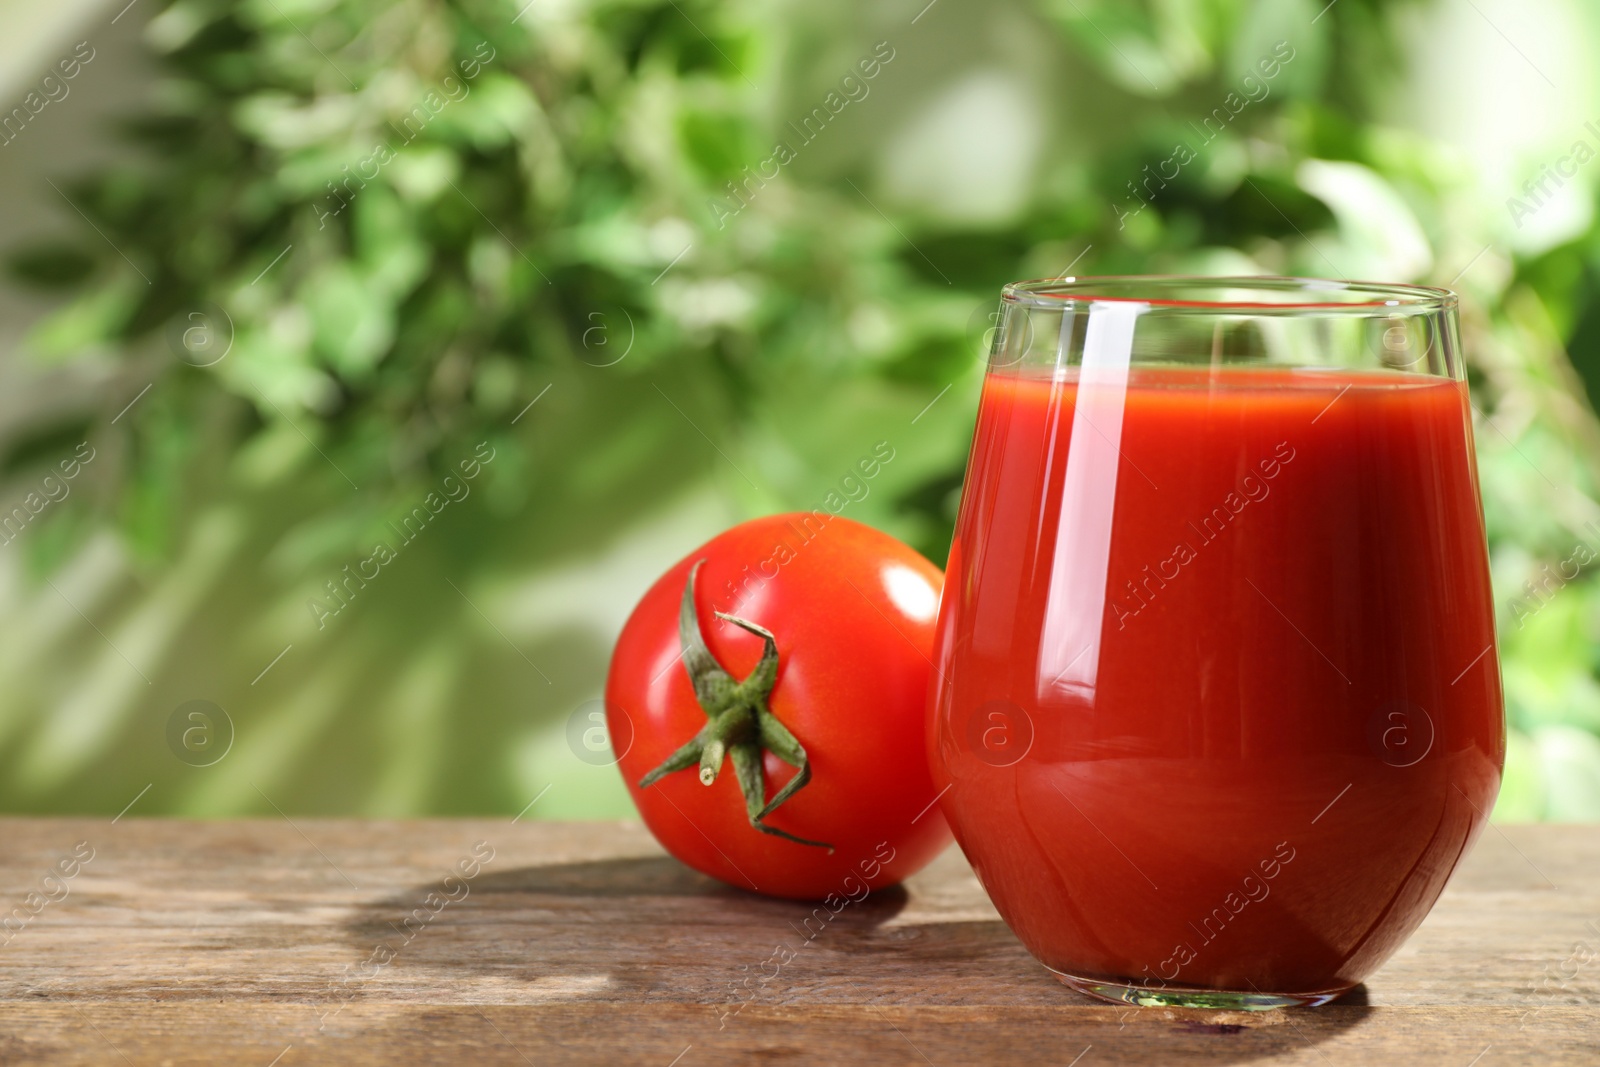 Photo of Delicious juice in glass and fresh tomato on wooden table against blurred background, space for text